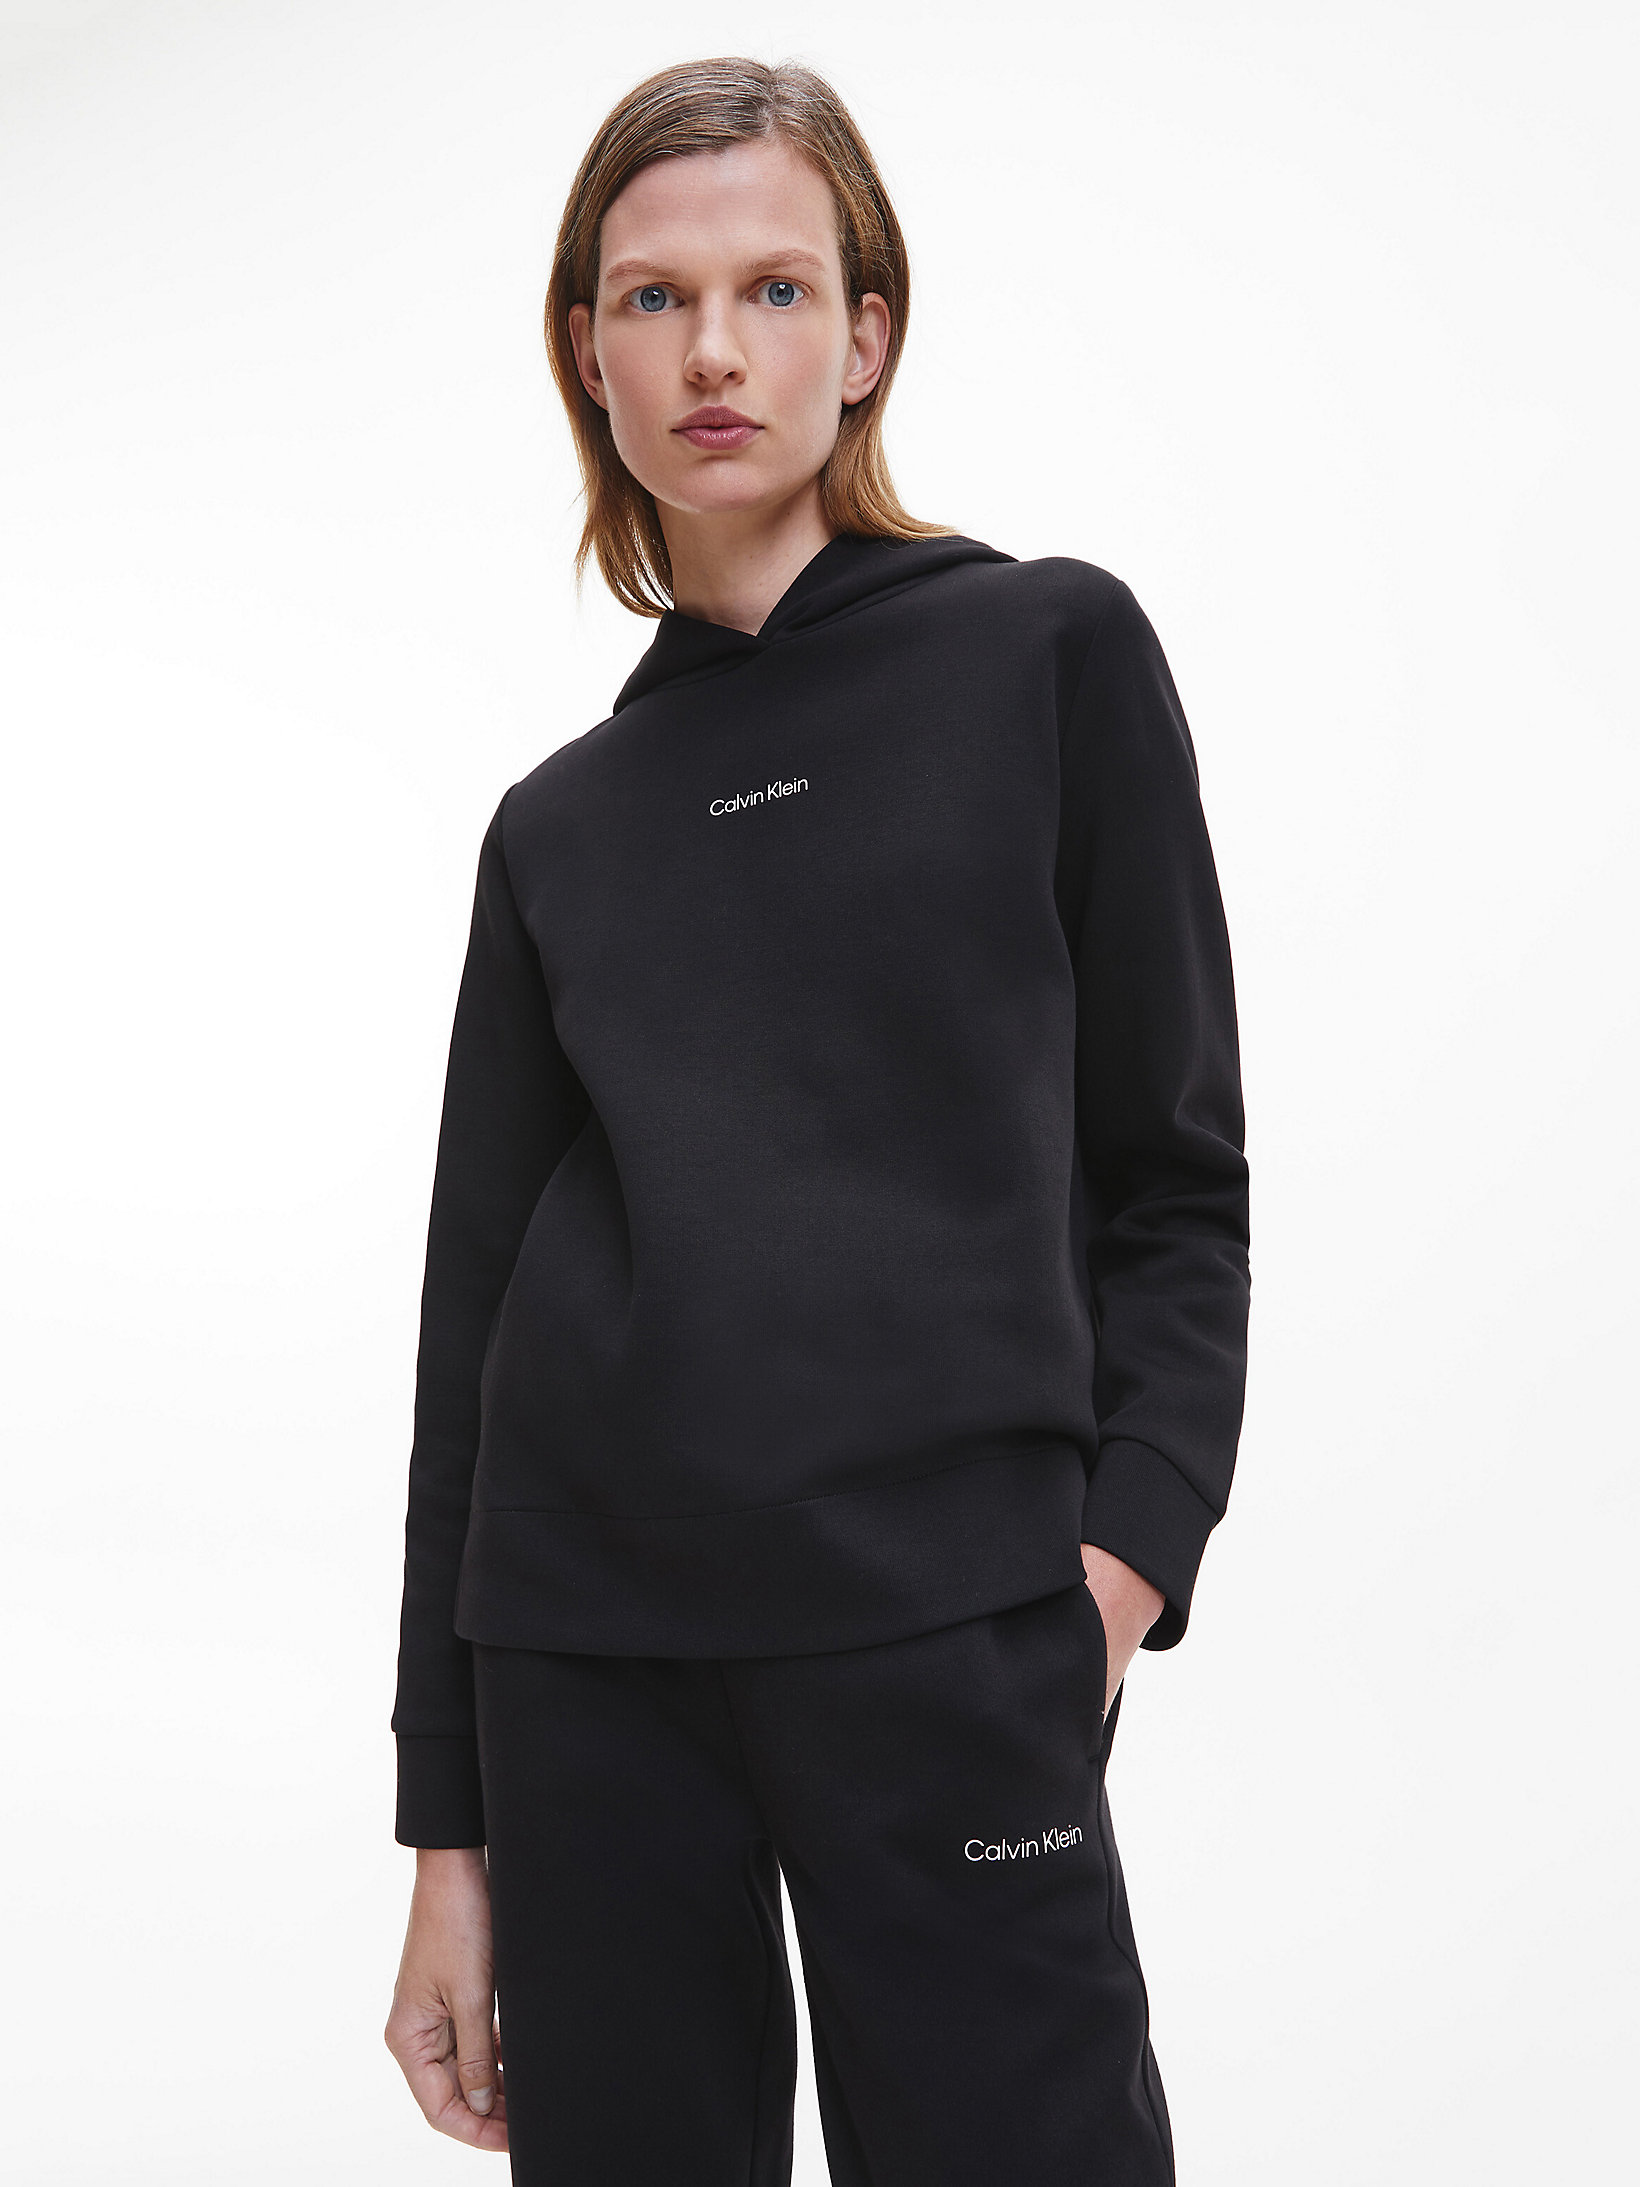 CK Black Recycled Polyester Hoodie undefined women Calvin Klein